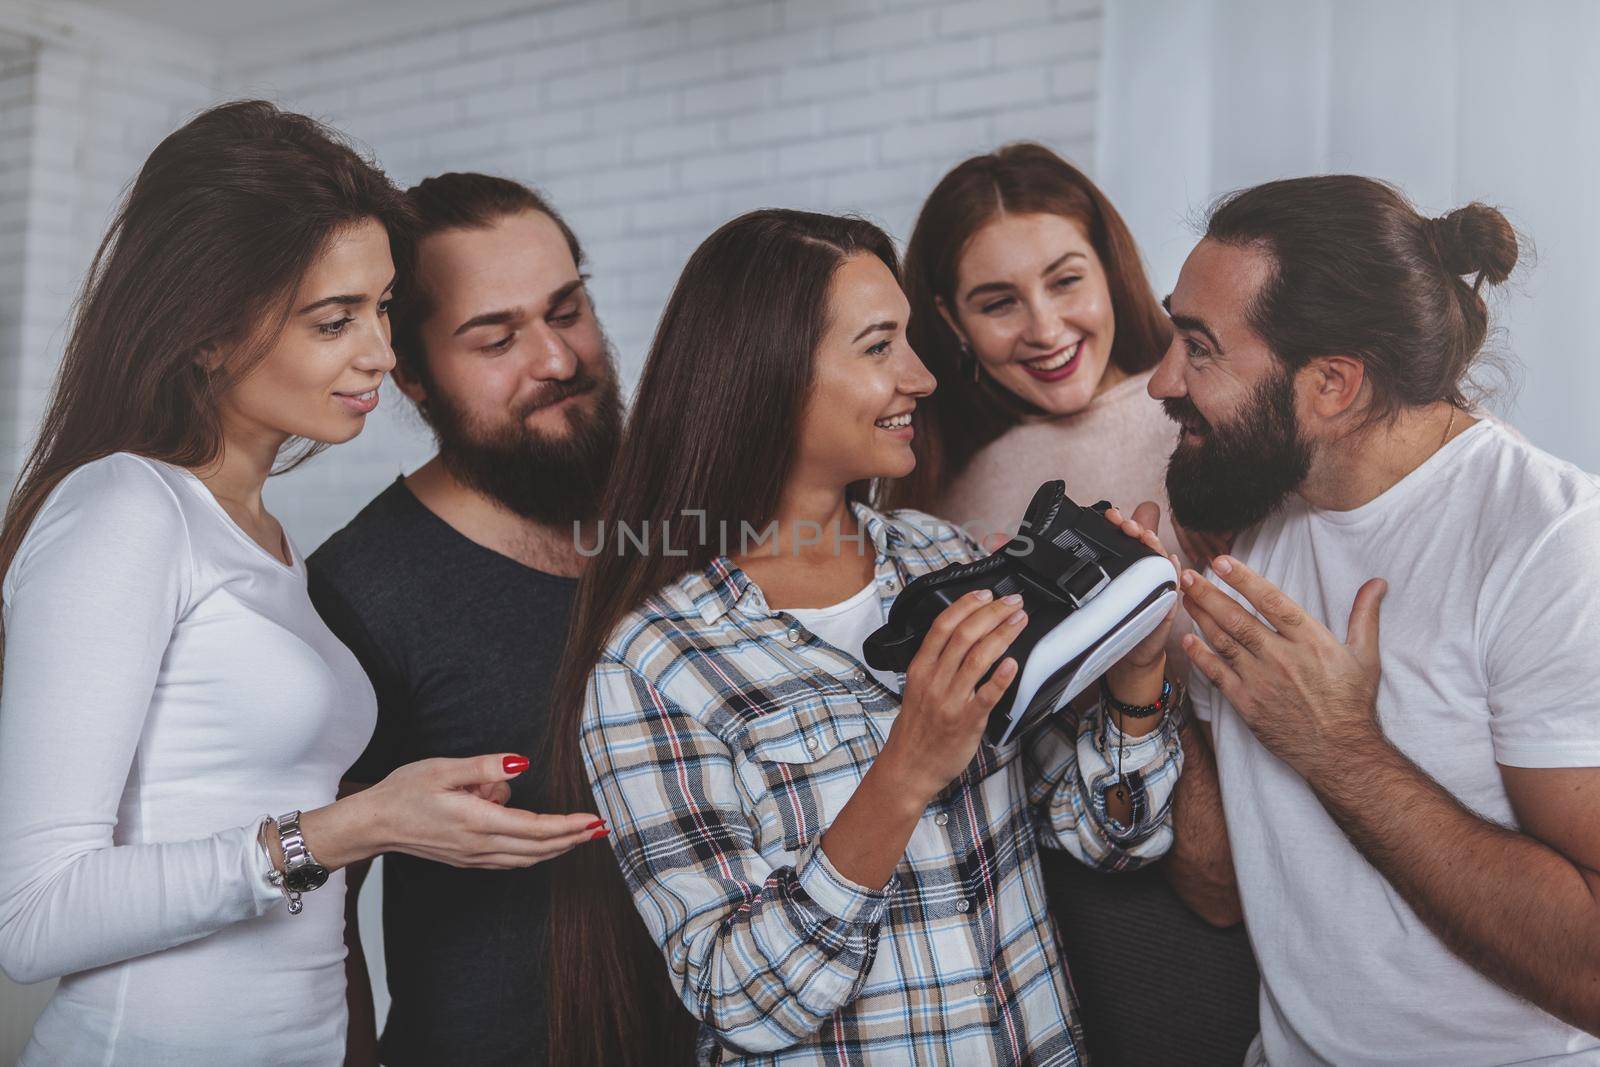 Charming young woman talking to her colleagues joyfully, holding virtual reality glasses. Group of coworkers discussing experience of using 3d vr goggles. Digital, technology concept